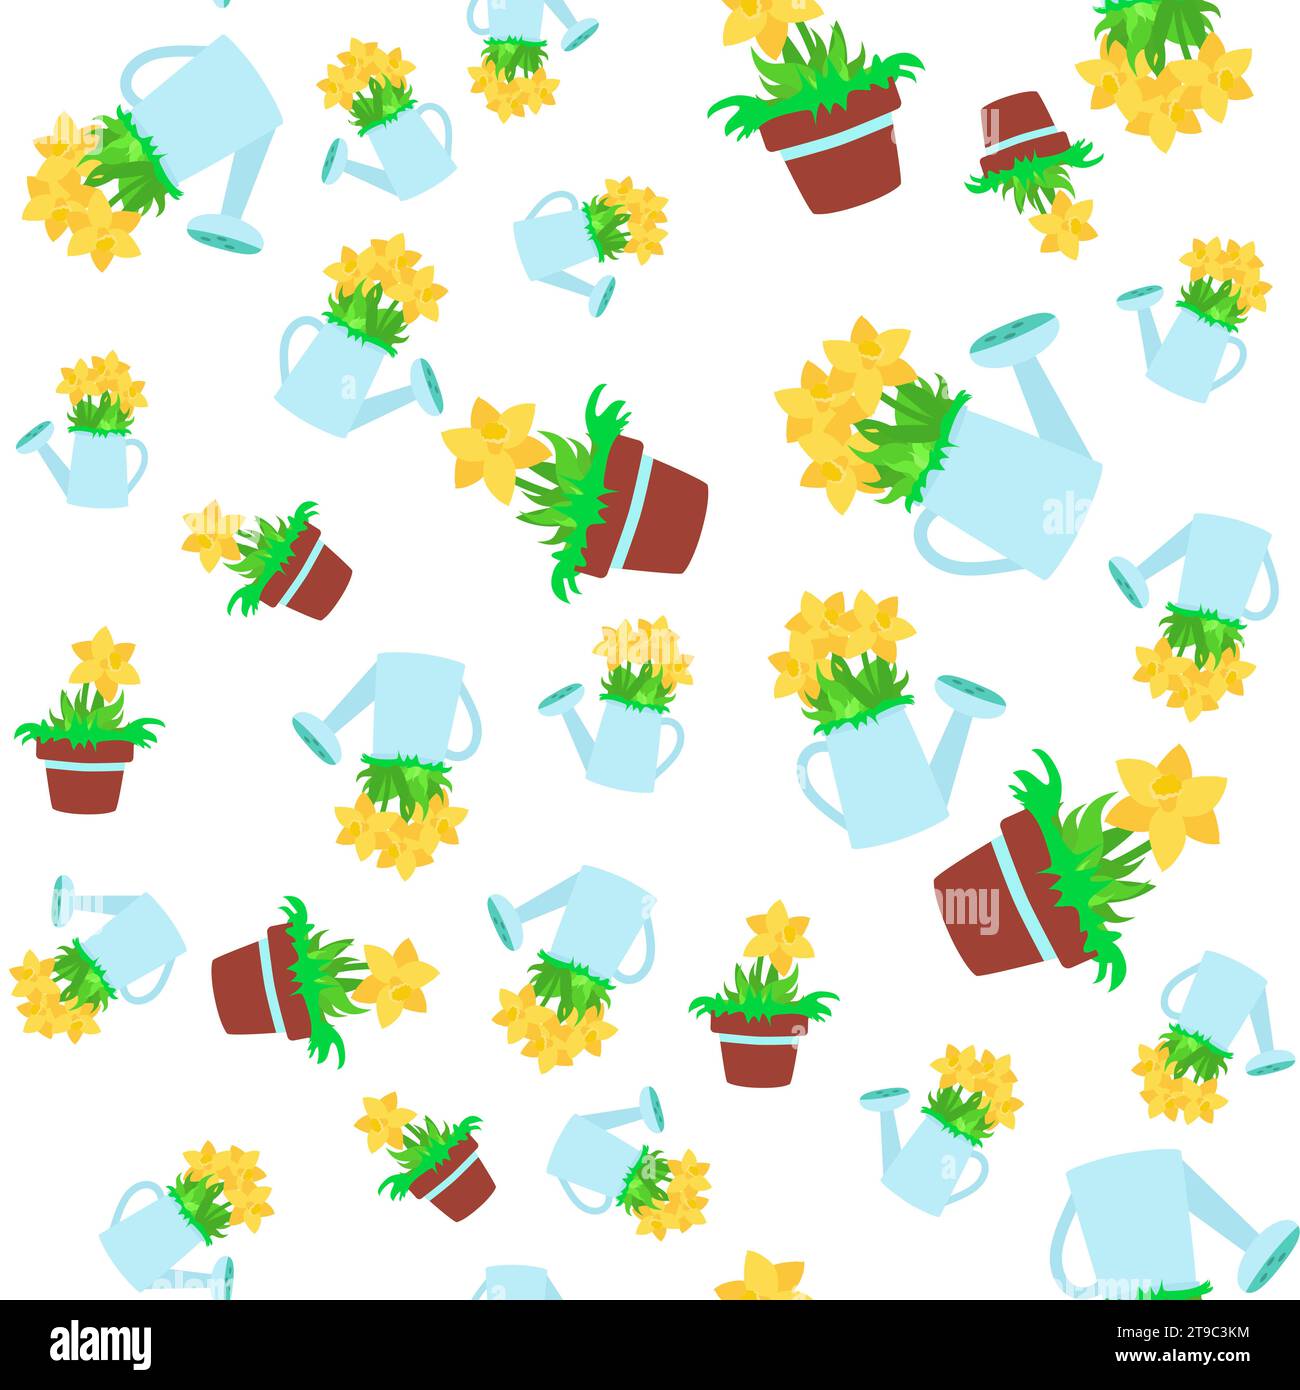 Seamless pattern spring flowers daffodils in a watering can. Ornament for textiles, packaging, background design in cartoon style. Stock Vector